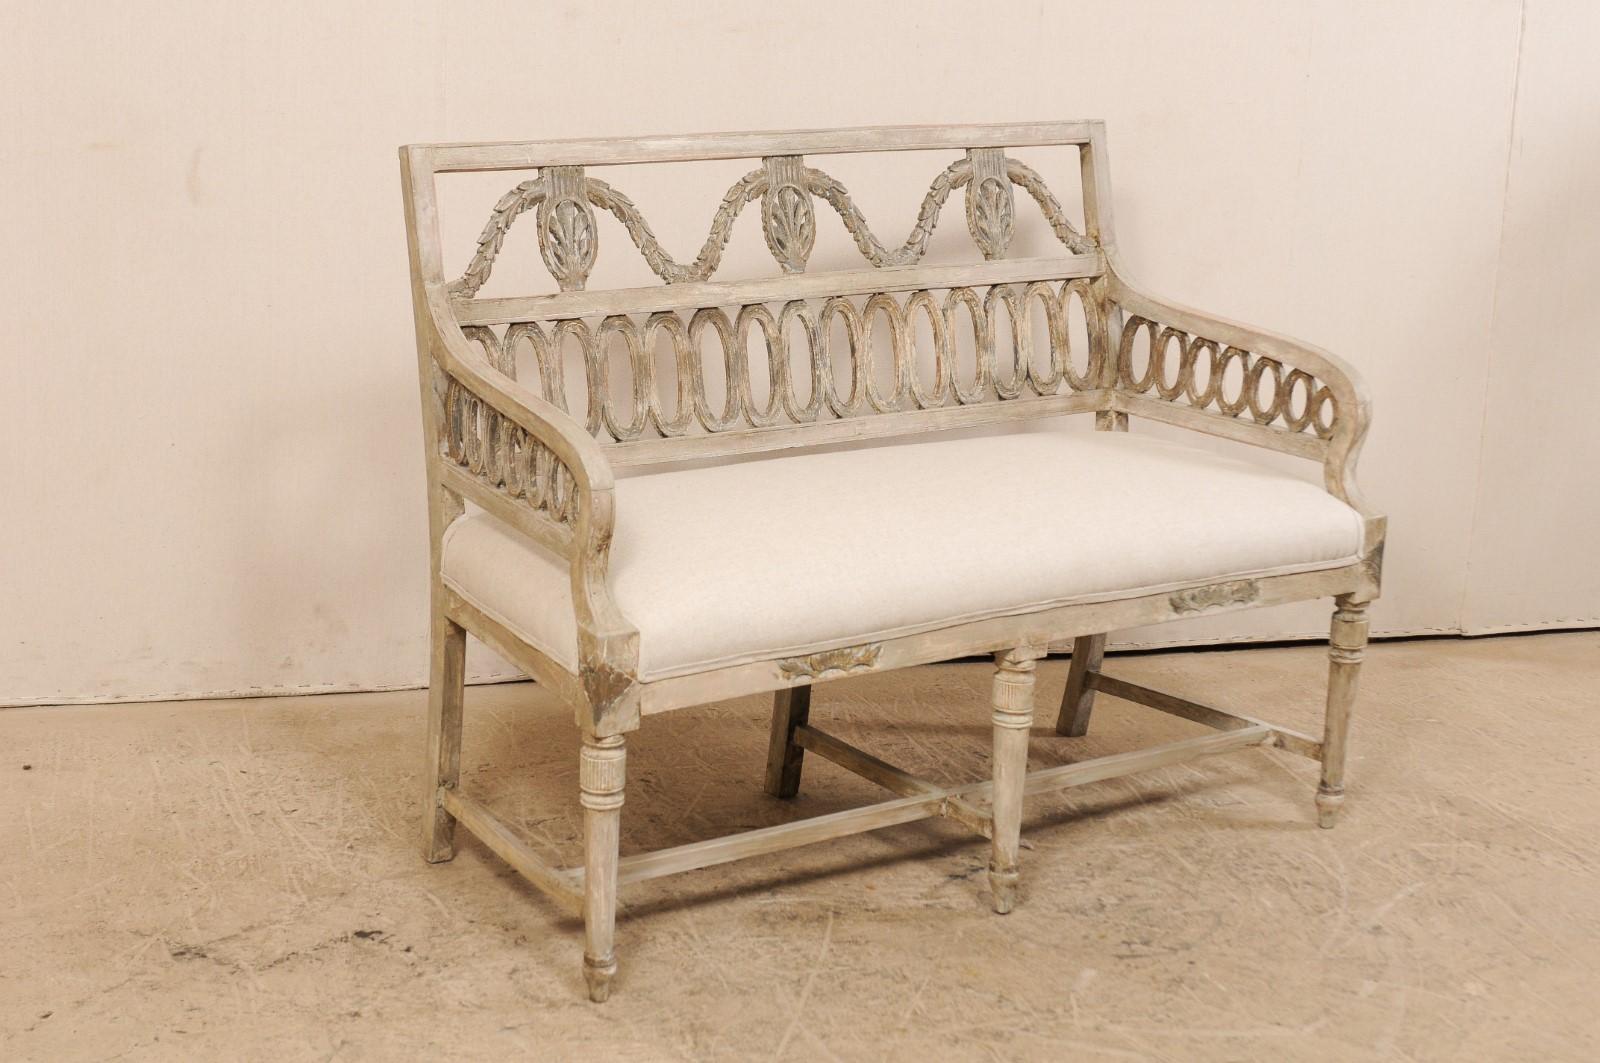 A Swedish period late Gustavian sofa bench with upholstered seat form the early 19th century. This antique sofa bench from Sweden has beautiful carved pierced splat backs in an oval-ring and garland motif. The sofa has a flat top rail along back,